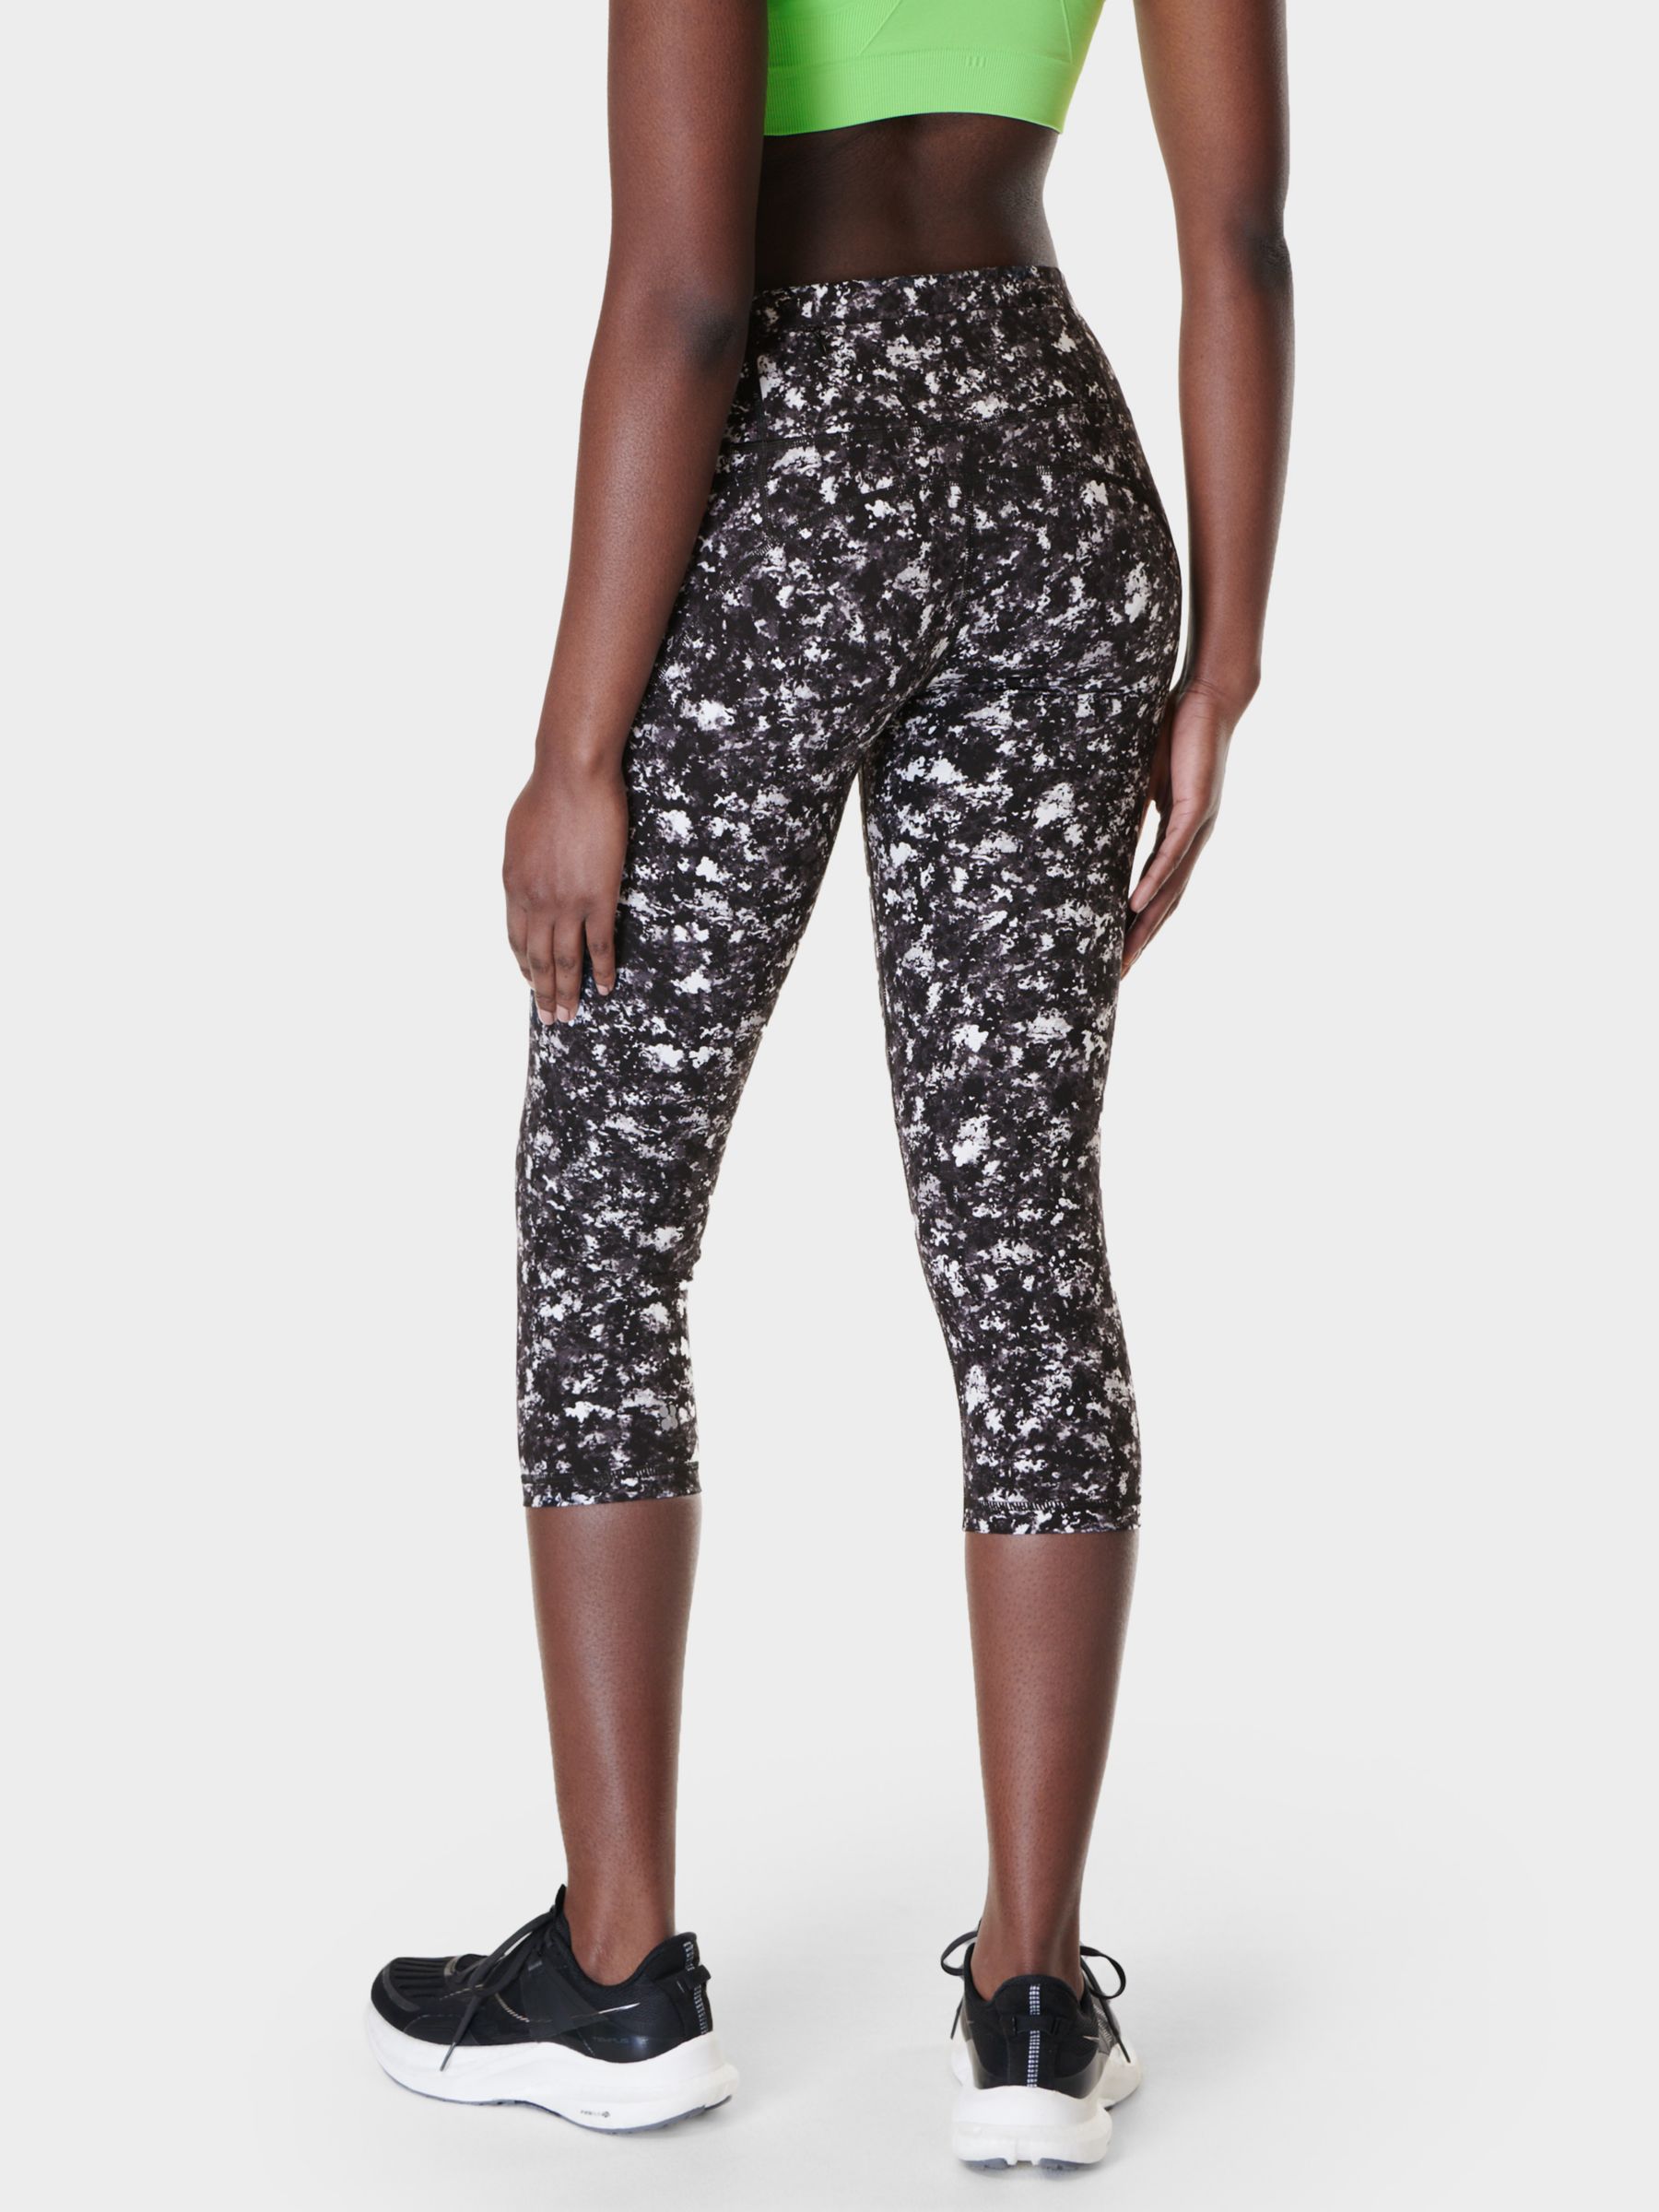 Buy Sweaty Betty Power Cropped Abstract Workout Leggings, Black/Multi Online at johnlewis.com